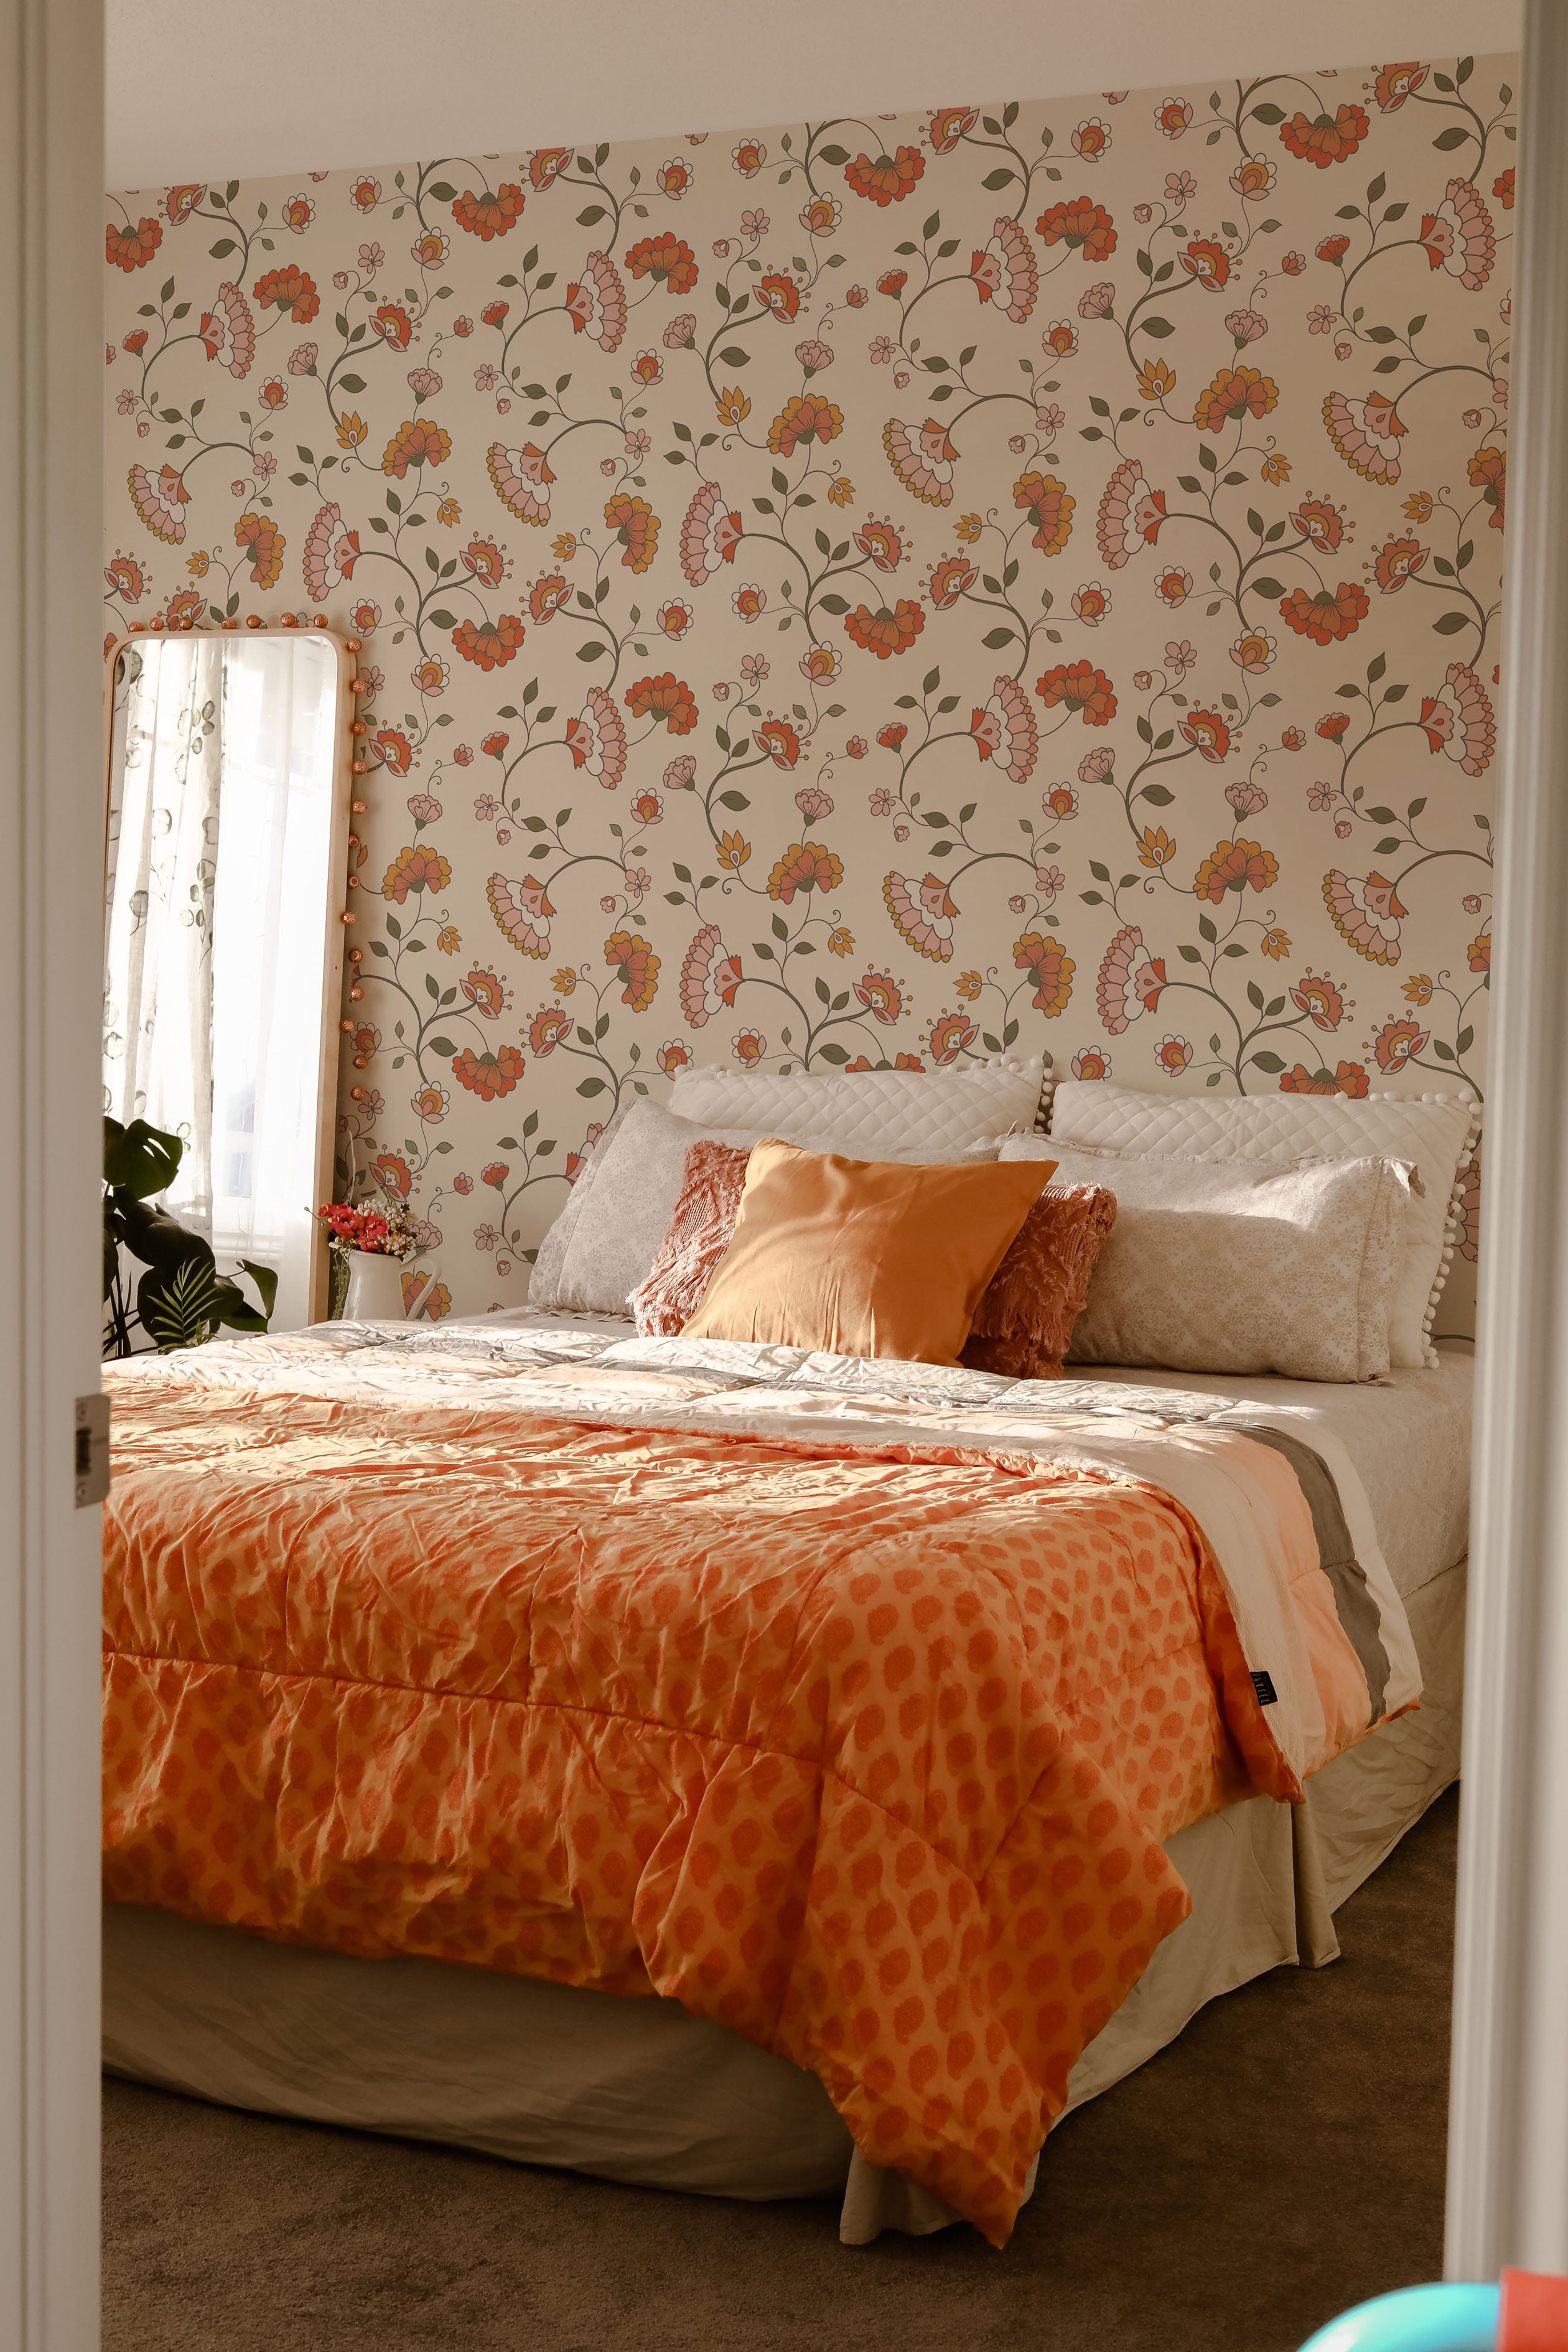 A cozy bedroom filled with natural light, adorned with the Retro Pattern Wallpaper. The room features a bed with an orange textured comforter and decorative pillows in shades of orange and cream, harmoniously blending with the room's warm color scheme